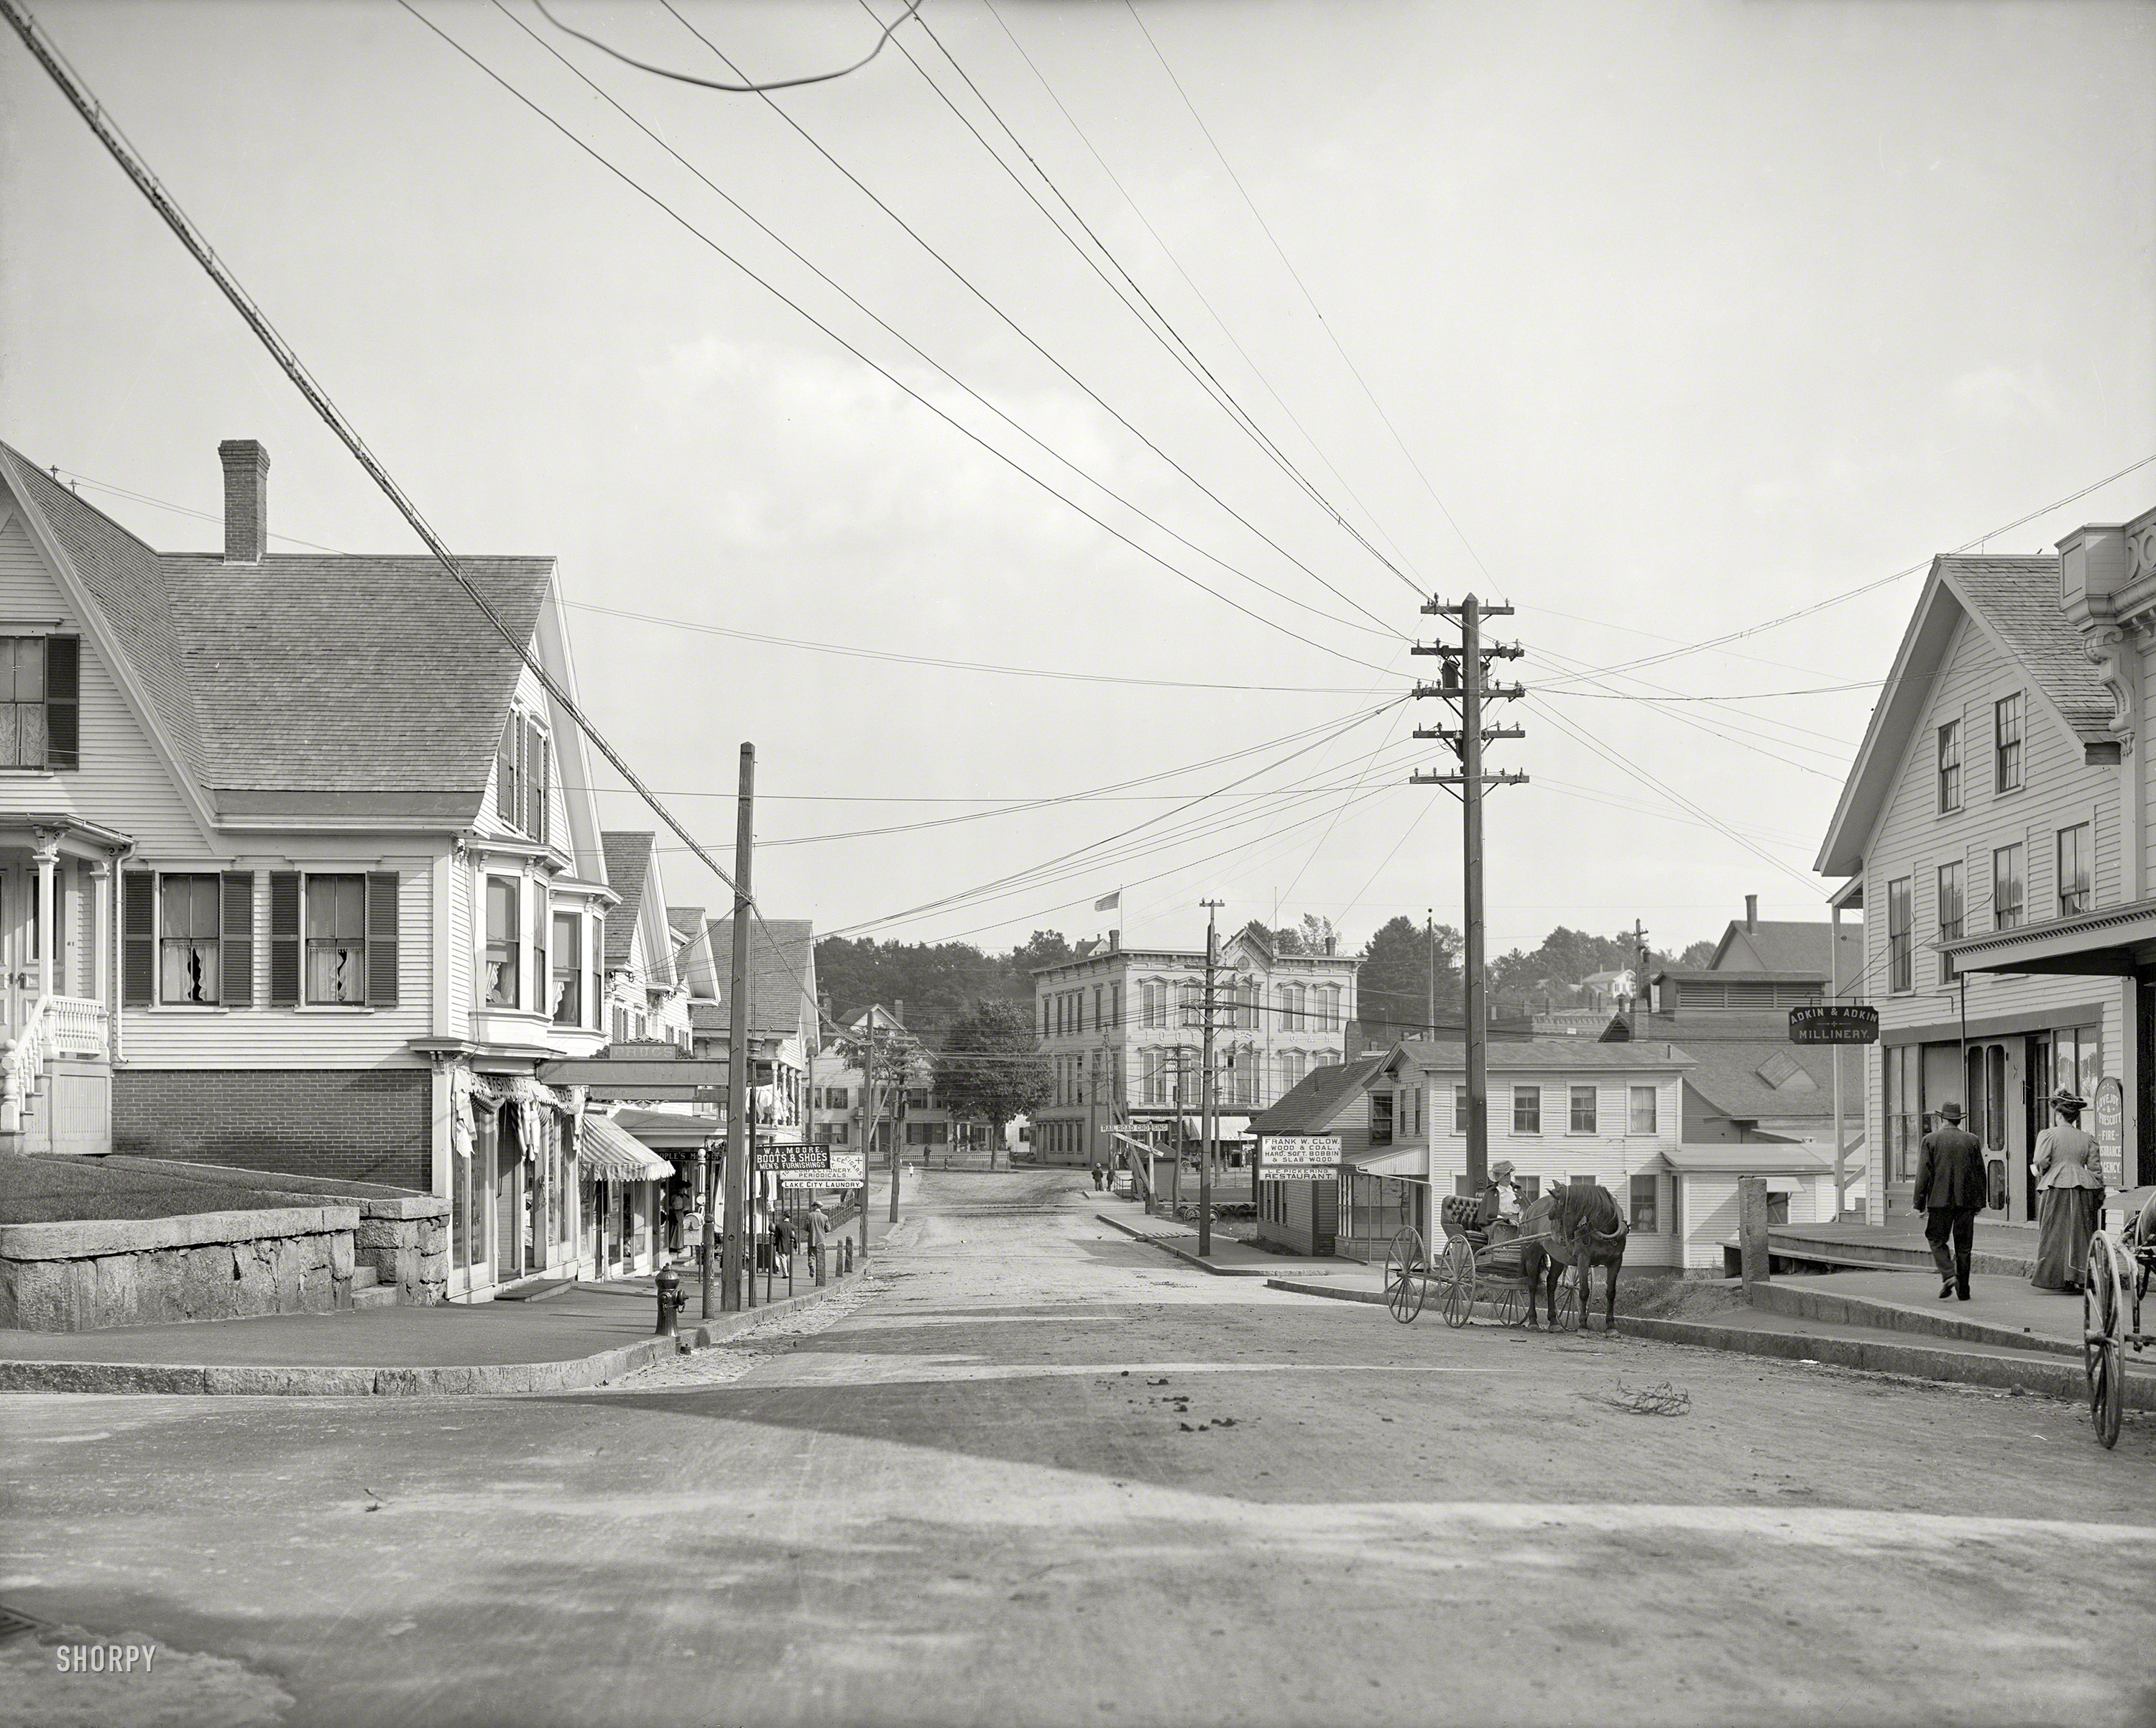 Circa 1907. "Street in Lakeport, New Hampshire." Points of interest in this view of the fair city (last seen here) include the Lovejoy & Prescott fire insurance agency, Adkin & Adkin Millinery, the L.E. Pickering restaurant, Frank Clow Wood & Coal ("Hard, Soft, Bobbin & Slab"), W.A. Moore Boots & Shoes, and a lady having a conversation with her horse. Not pictured: sign painter with a graduate degree in ampersands. 8x10 glass negative, Detroit Publishing. View full size.